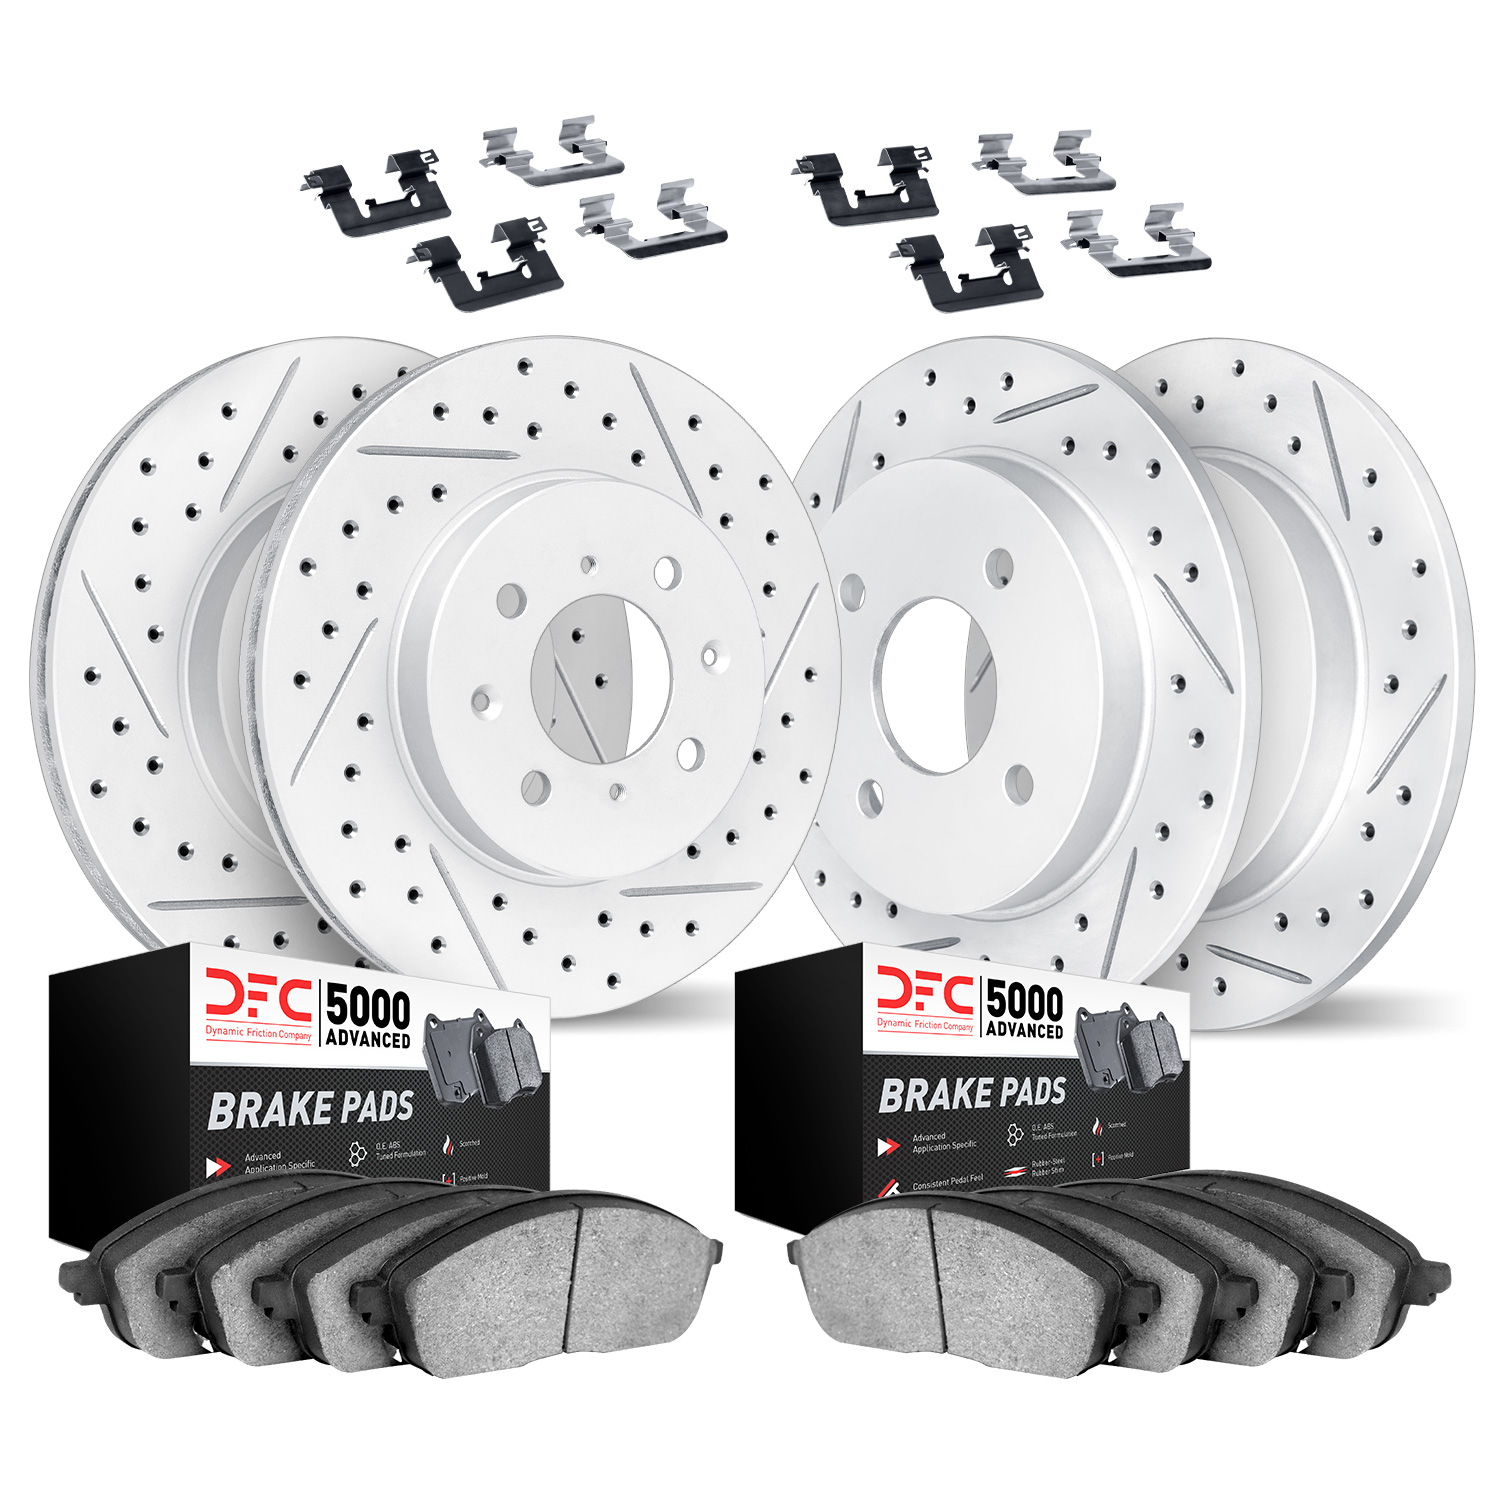 2514-07001 Geoperformance Drilled/Slotted Rotors w/5000 Advanced Brake Pads Kit & Hardware, 2013-2019 Mopar, Position: Front and